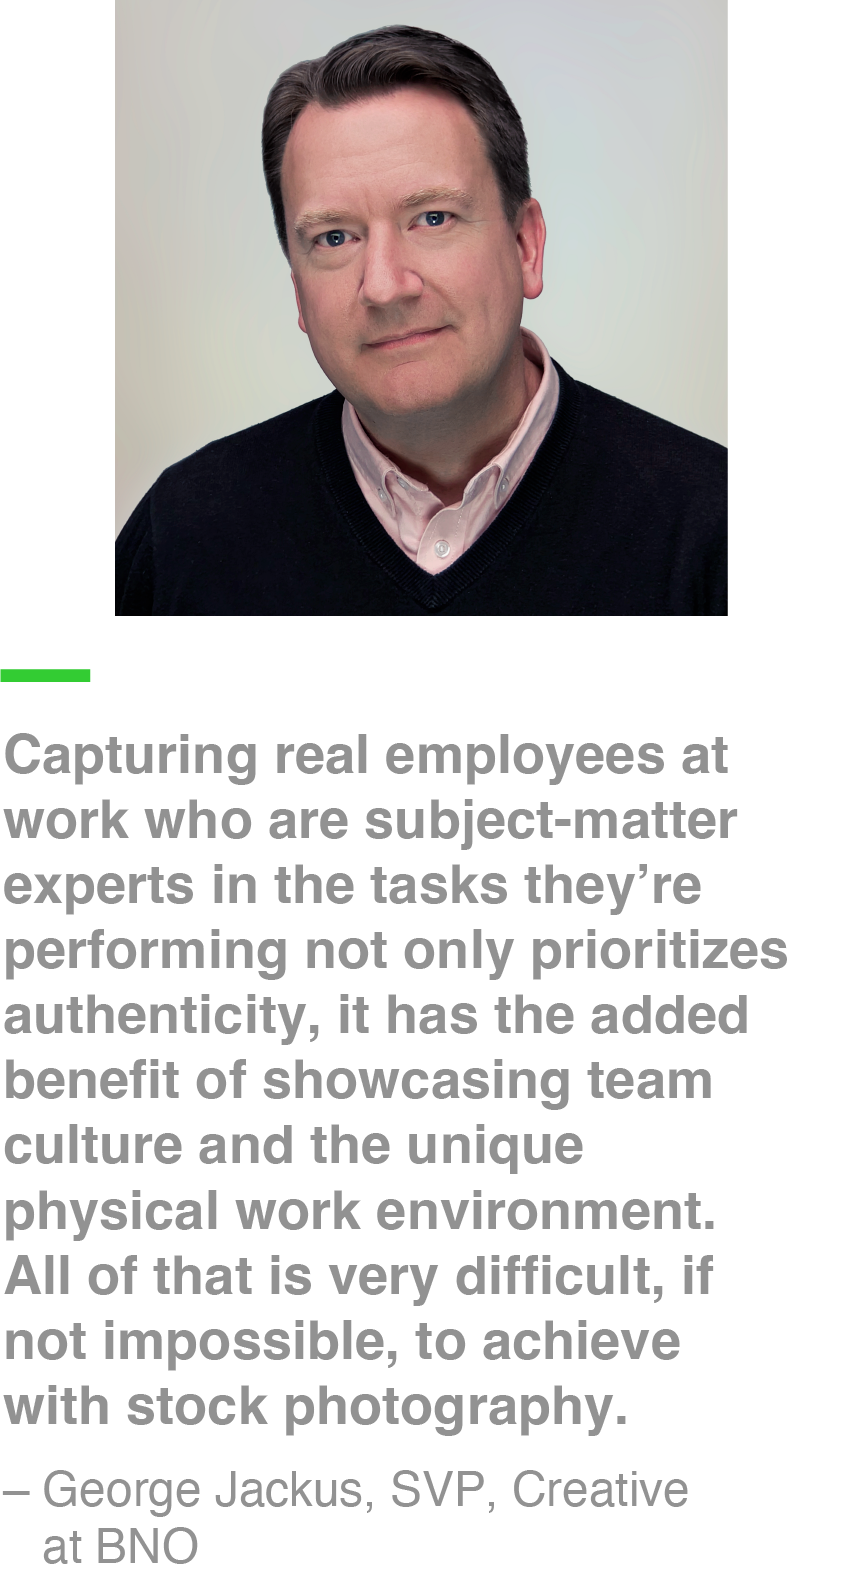 Capturing real employees at work who are subject-matter experts in the tasks they’re performing not only prioritizes authenticity, it has the added benefit of showcasing team culture and the unique physical work environment. All of that is very difficult, if not impossible, to achieve with stock photography. – George Jackus, SVP, Creative at BNO